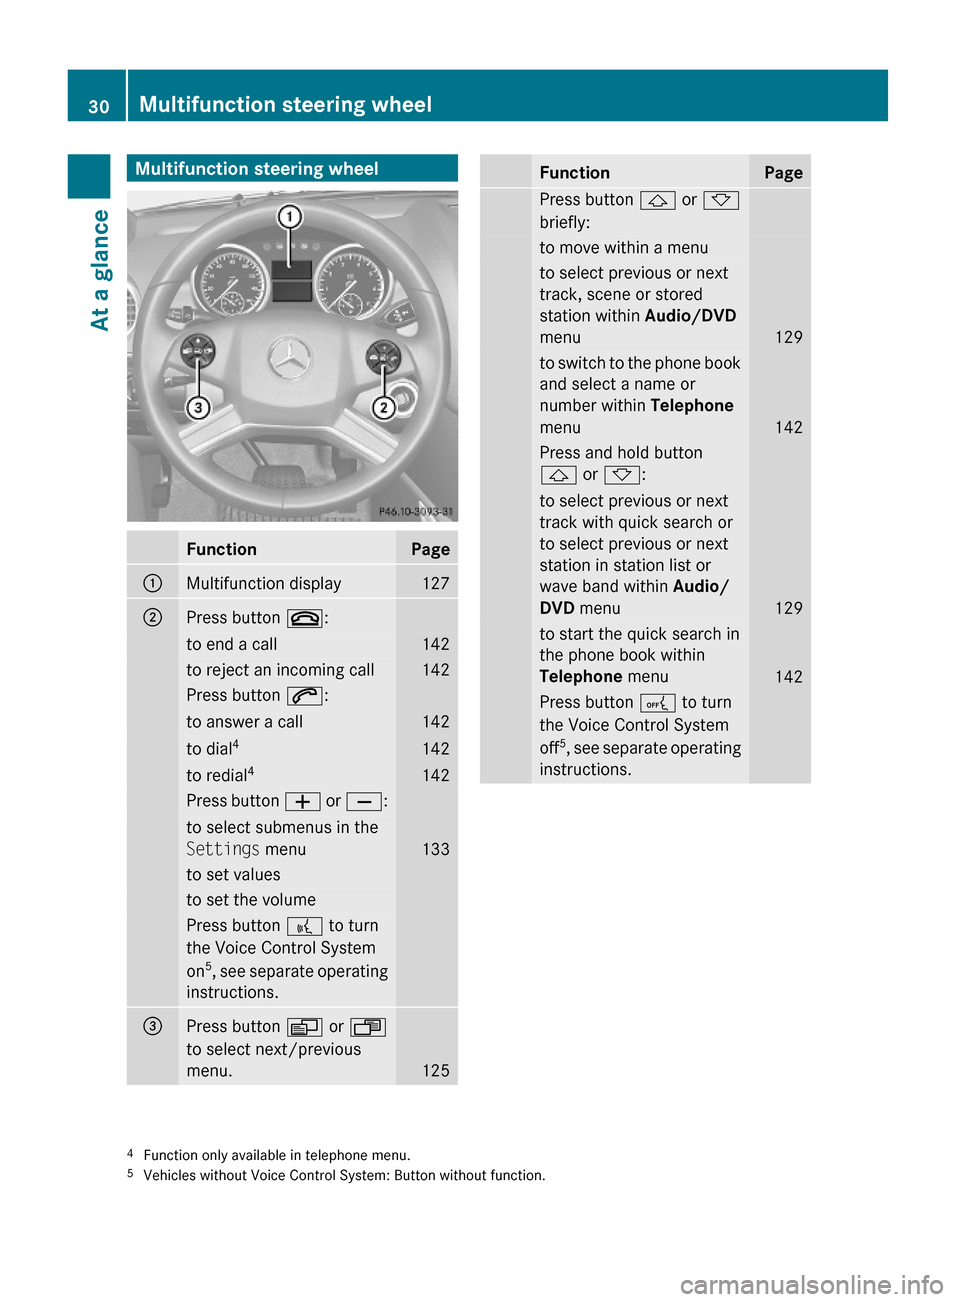 MERCEDES-BENZ GL450 2010 X164 Owners Guide Multifunction steering wheelFunctionPage:Multifunction display127;Press button ~:to end a call142to reject an incoming call142Press button 6:to answer a call142to dial4142to redial4142Press button W o